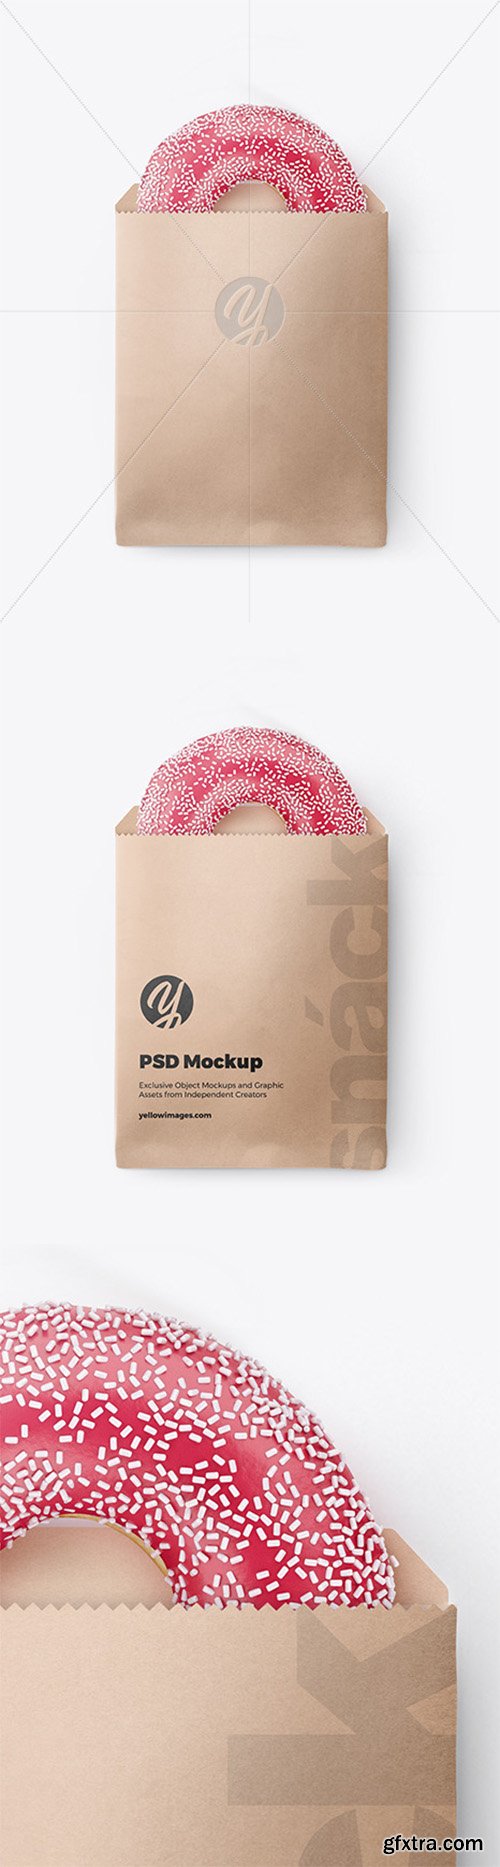 Paper Pack with Pink Glazed Donut Mockup 65182